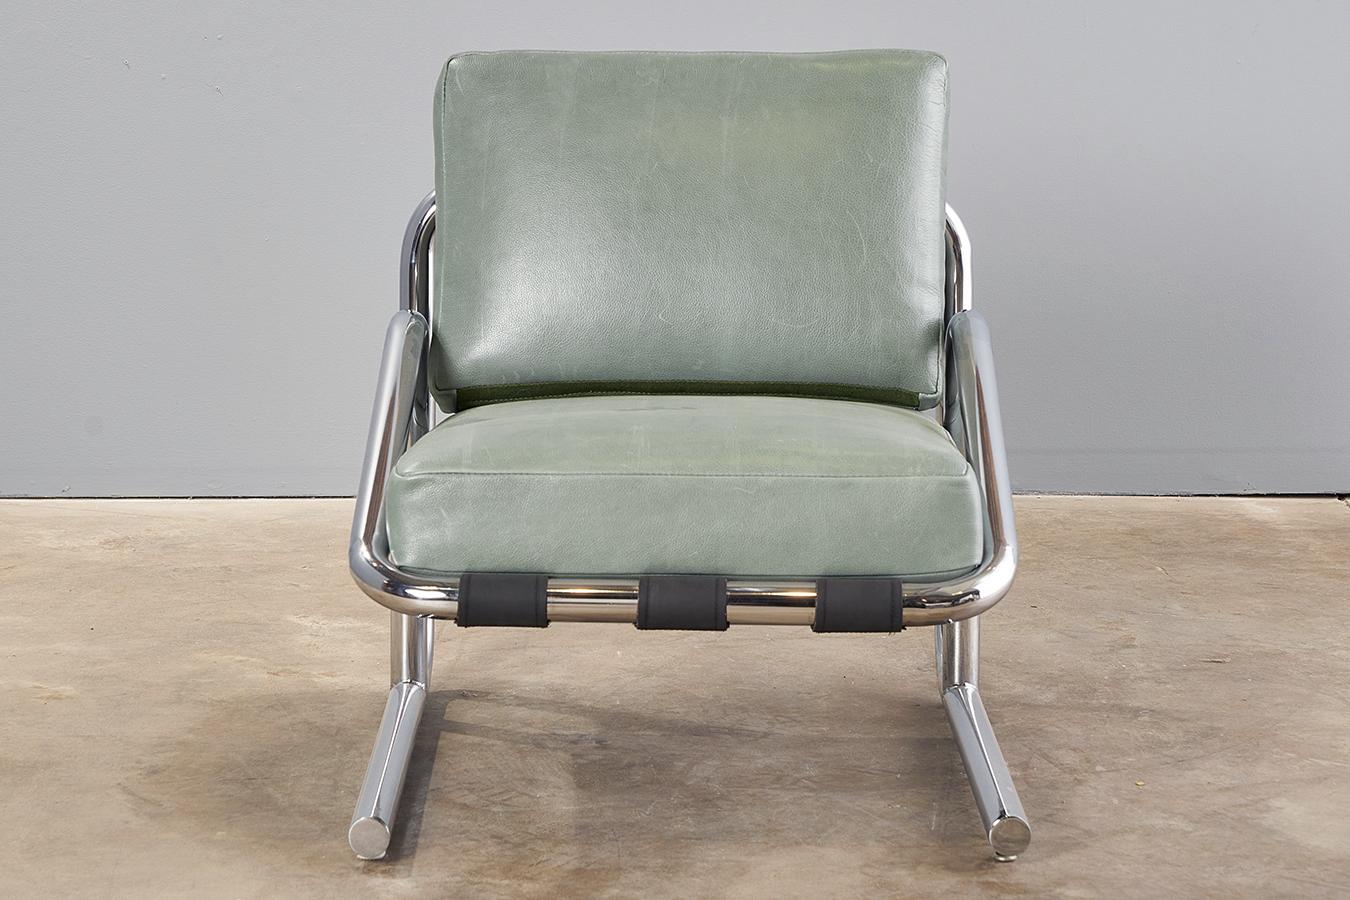 A unique chrome sling chair with leather box cushions. Very sturdy construction; the light aqua green leather is relatively new and shows some wear as expected but nothing major of note. Comfortable with just the right amount of curves, this one is